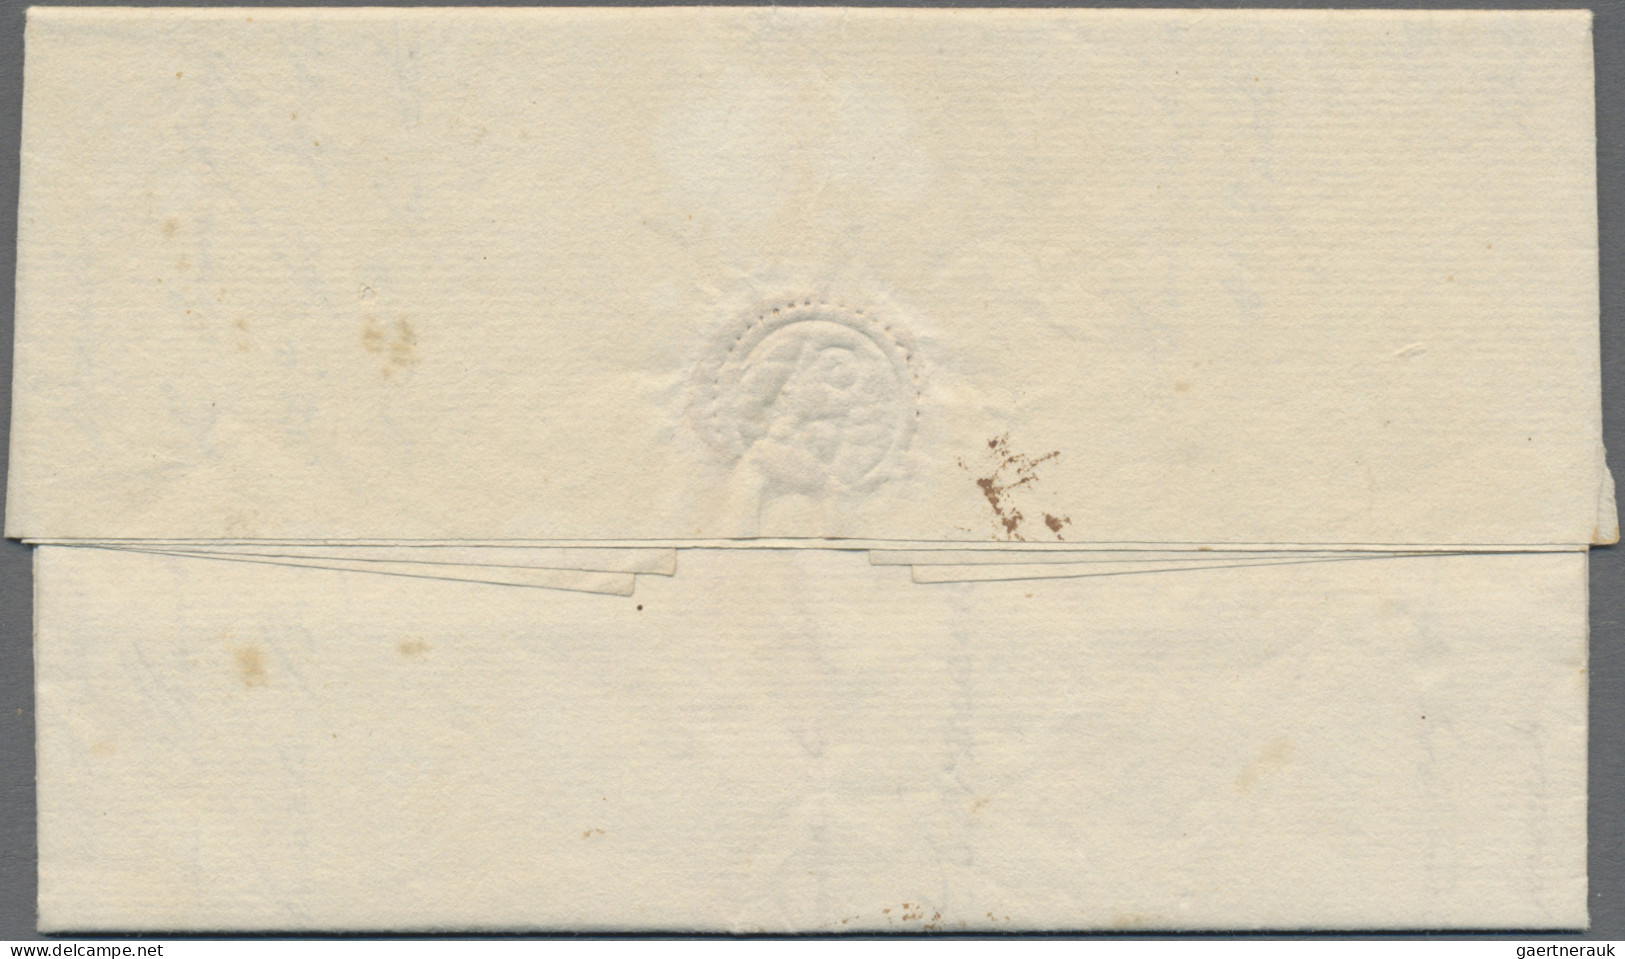 Ionian Islands -  Pre Adhesives  / Stampless Covers: 1818 Double Circle Handstam - Ionische Inseln